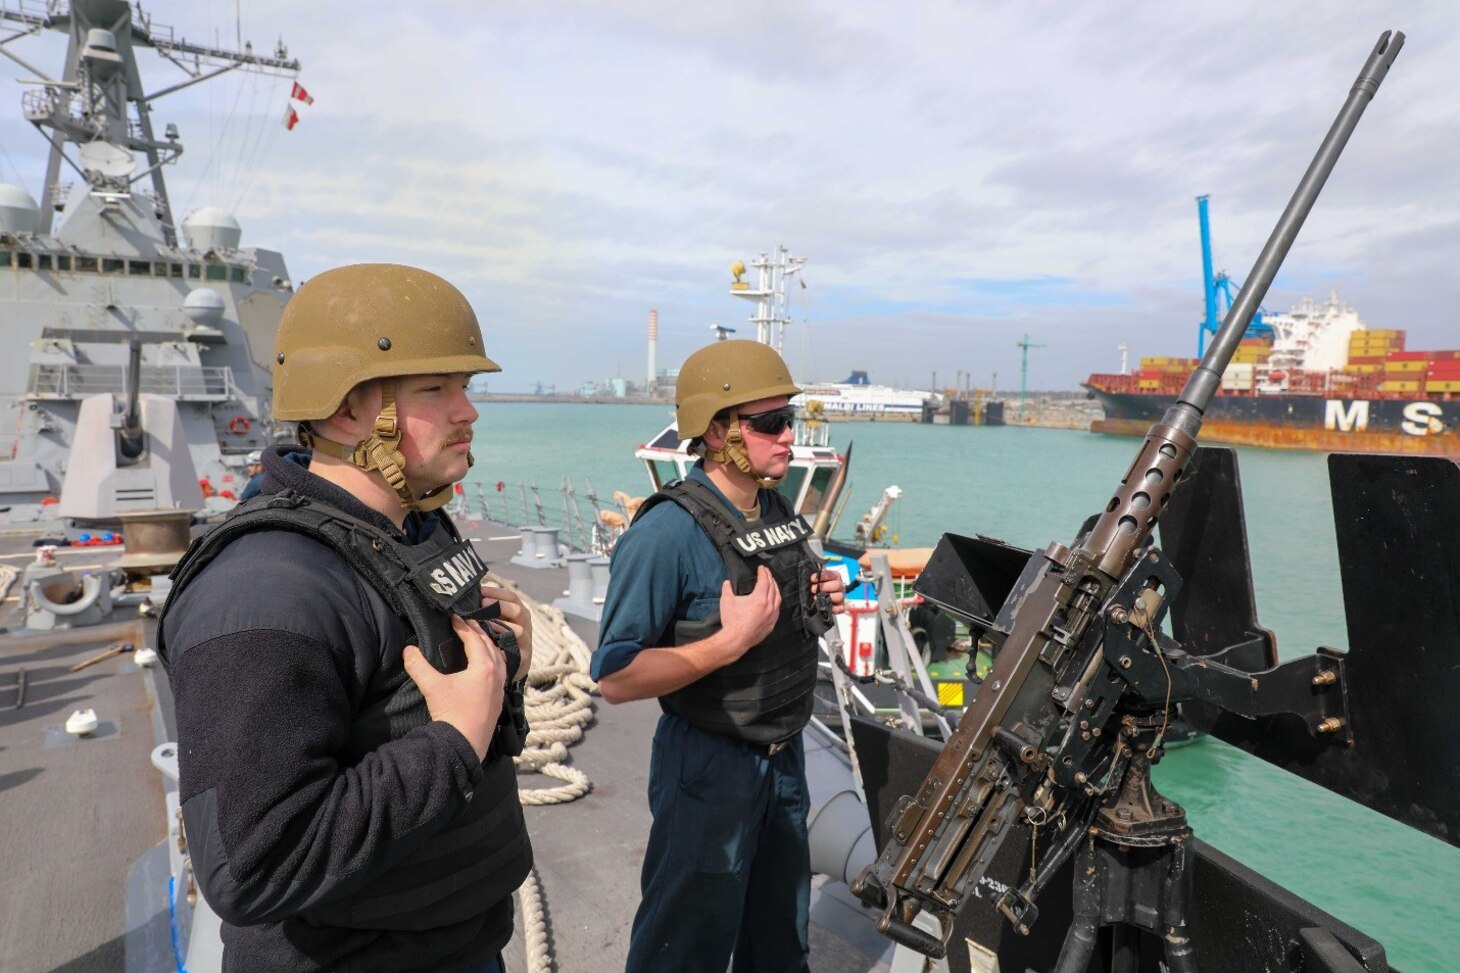 Gunners Mate 3rd Class Joshua Lesnar, left, and Gunners Mate 3rd Class Jesse Deese, both assigned to the Arleigh Burke-class guided-missile destroyer USS Delbert D. Black (DDG 119), stand small caliber action team watch while arriving in Civitavecchia, Italy for a scheduled port visit, March 11, 2023. The George H.W. Bush Carrier Strike Group is on a scheduled deployment in the U.S. Naval Forces Europe area of operations, employed by U.S. Sixth Fleet to defend U.S., allied, and partner interests.